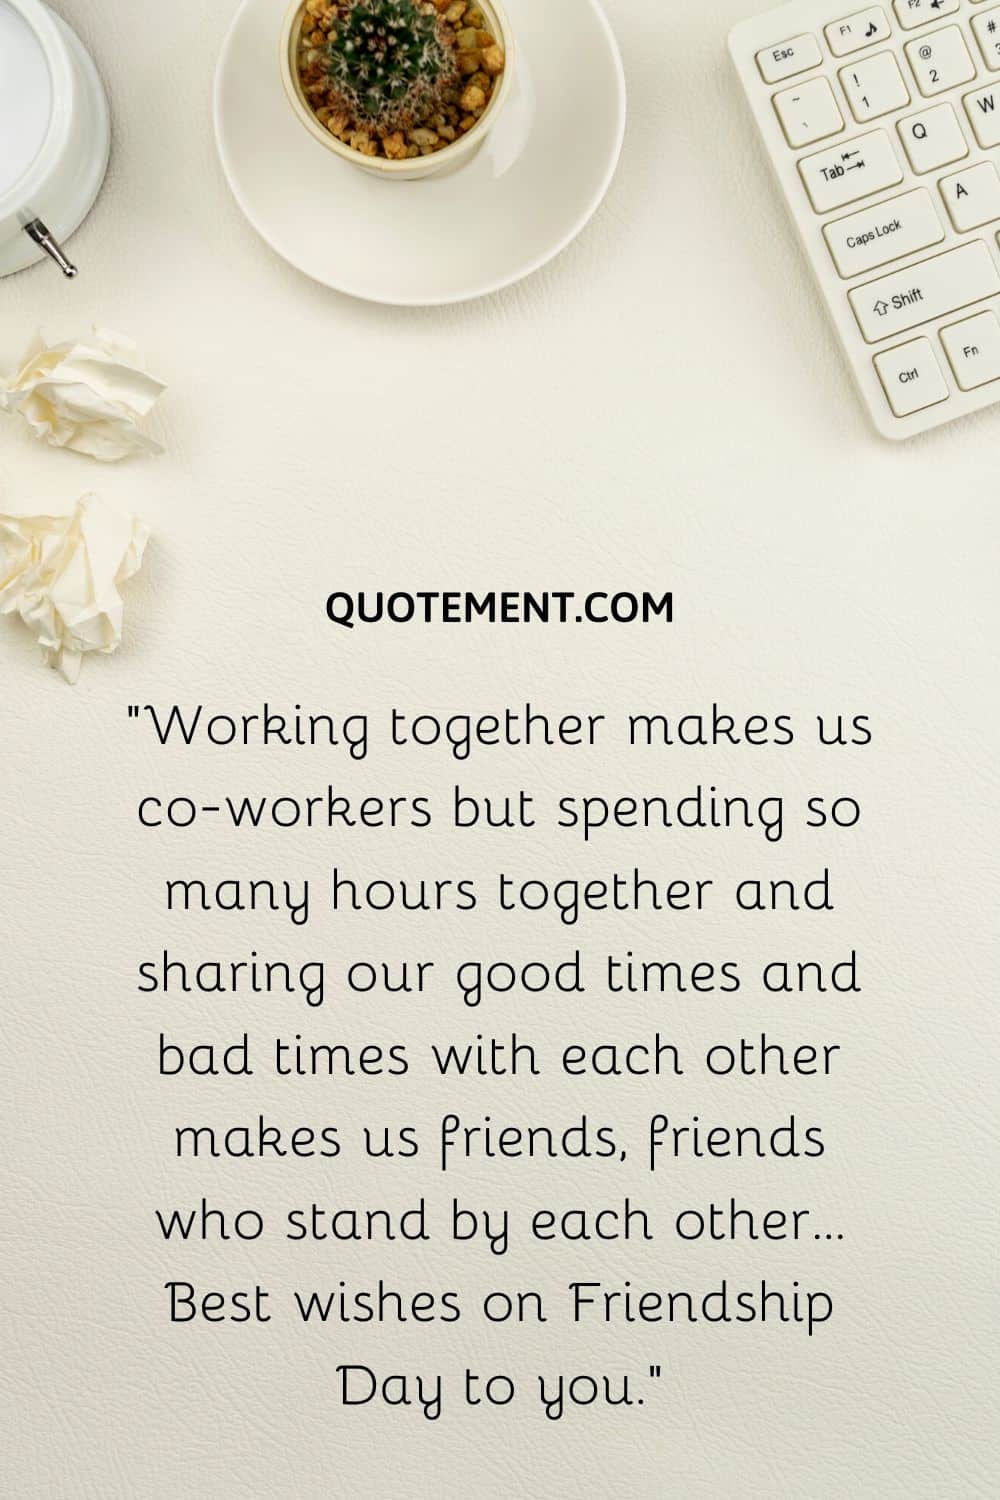 “Working together makes us co-workers but spending so many hours together and sharing our good times